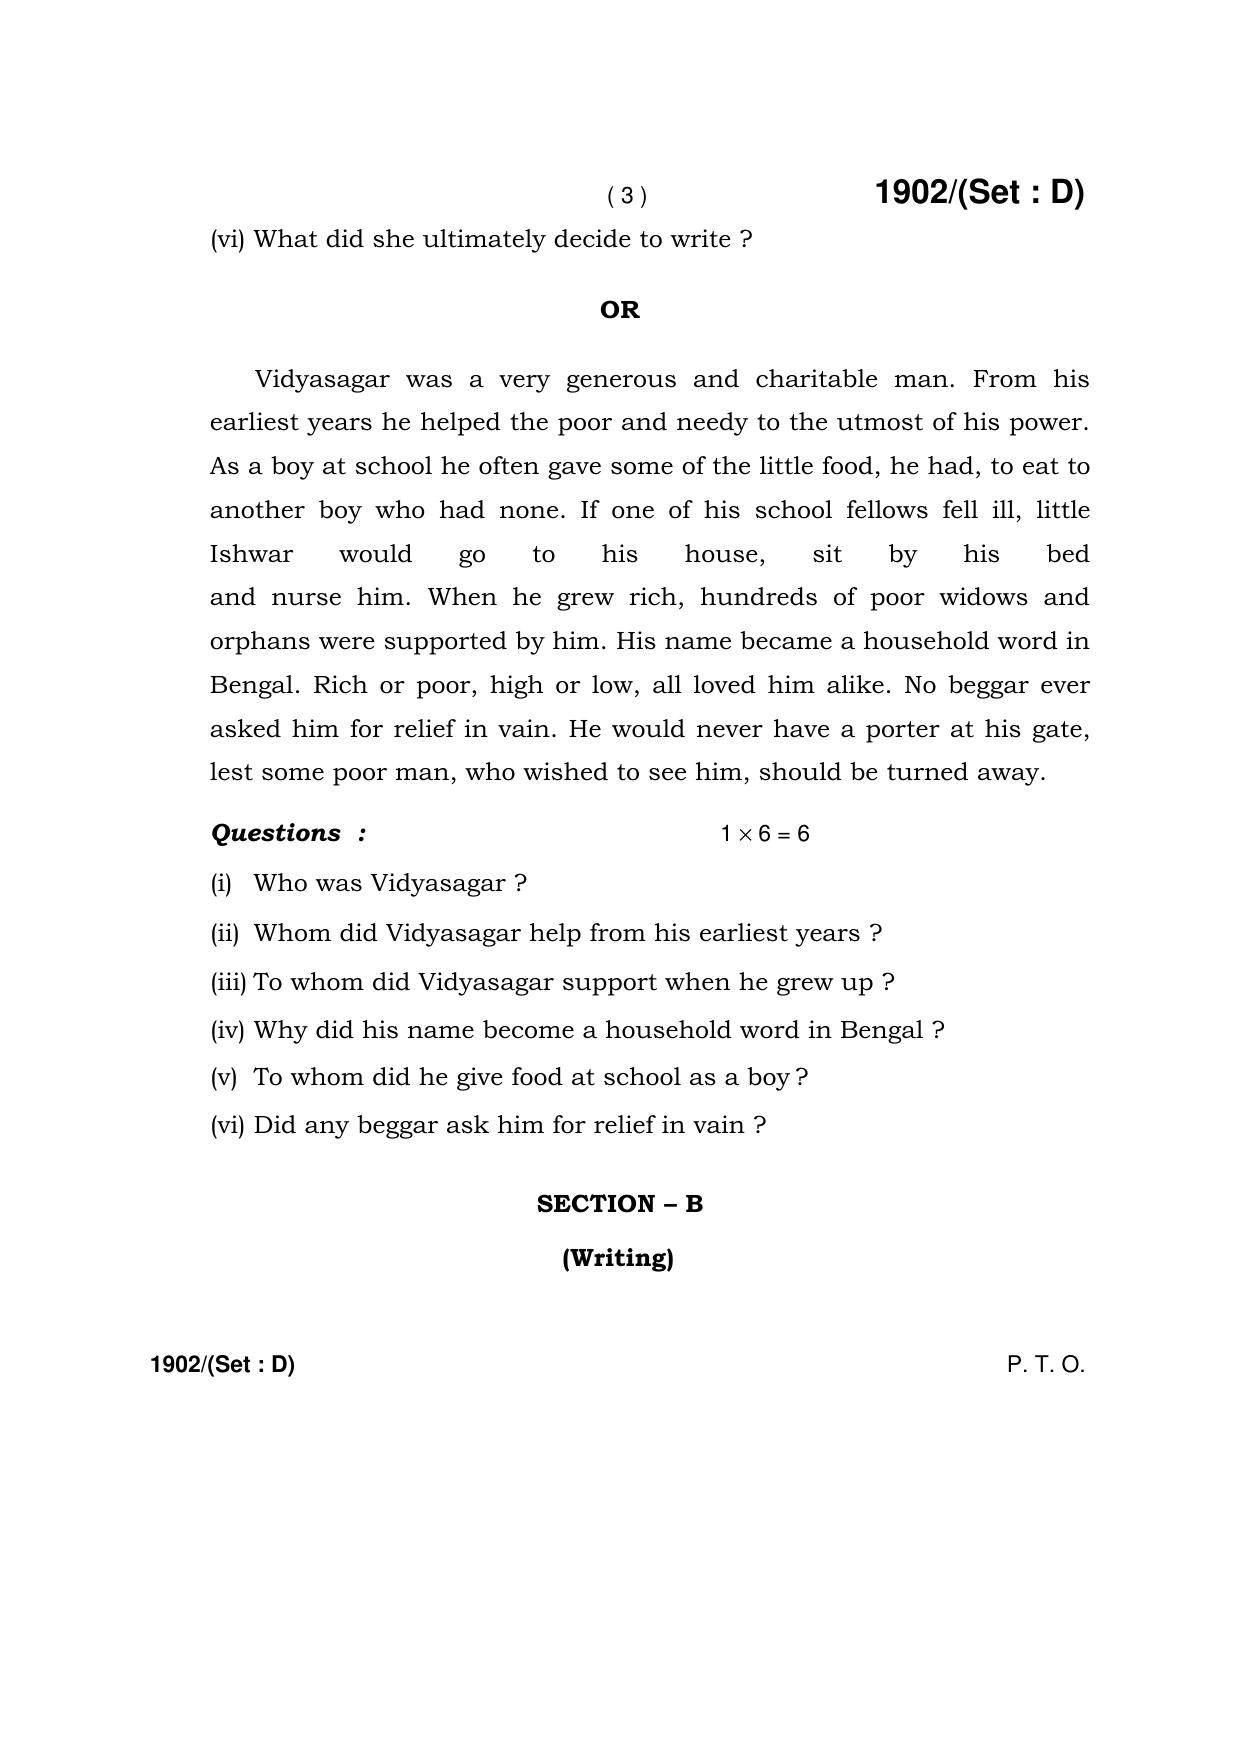 Haryana Board HBSE Class 10 English -D 2017 Question Paper - Page 3